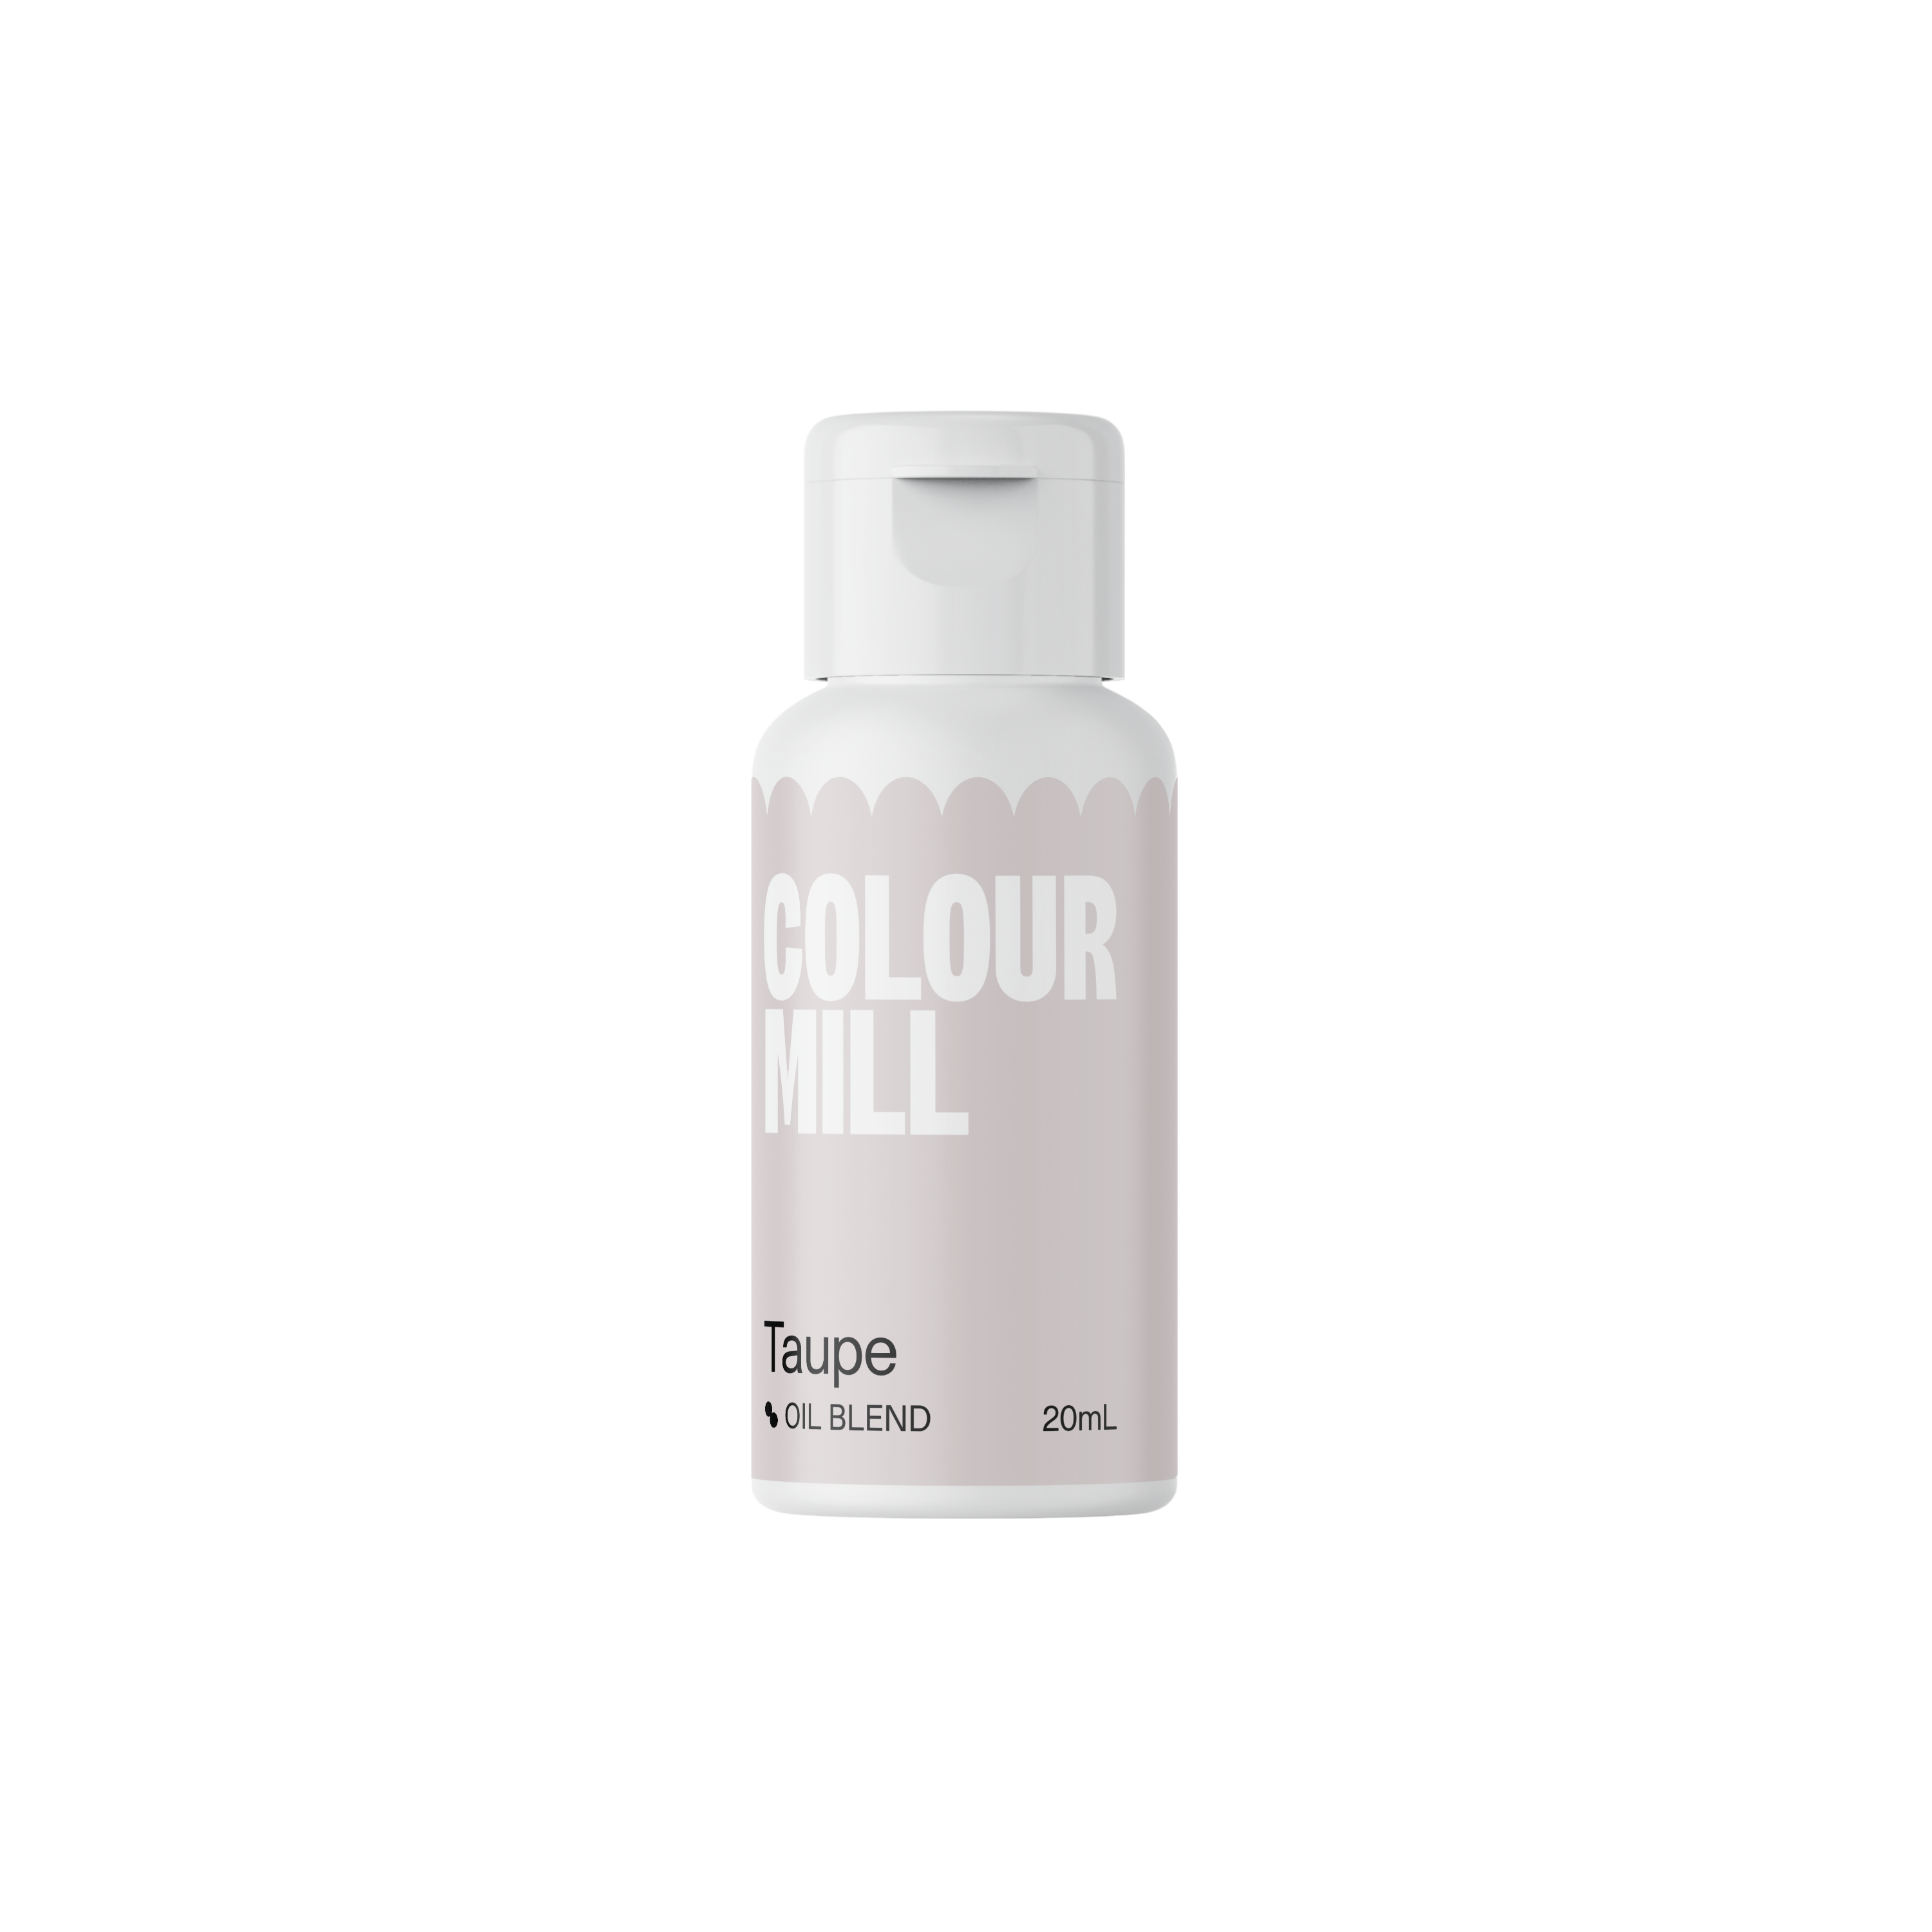 Taupe - Oil Blendproduct image